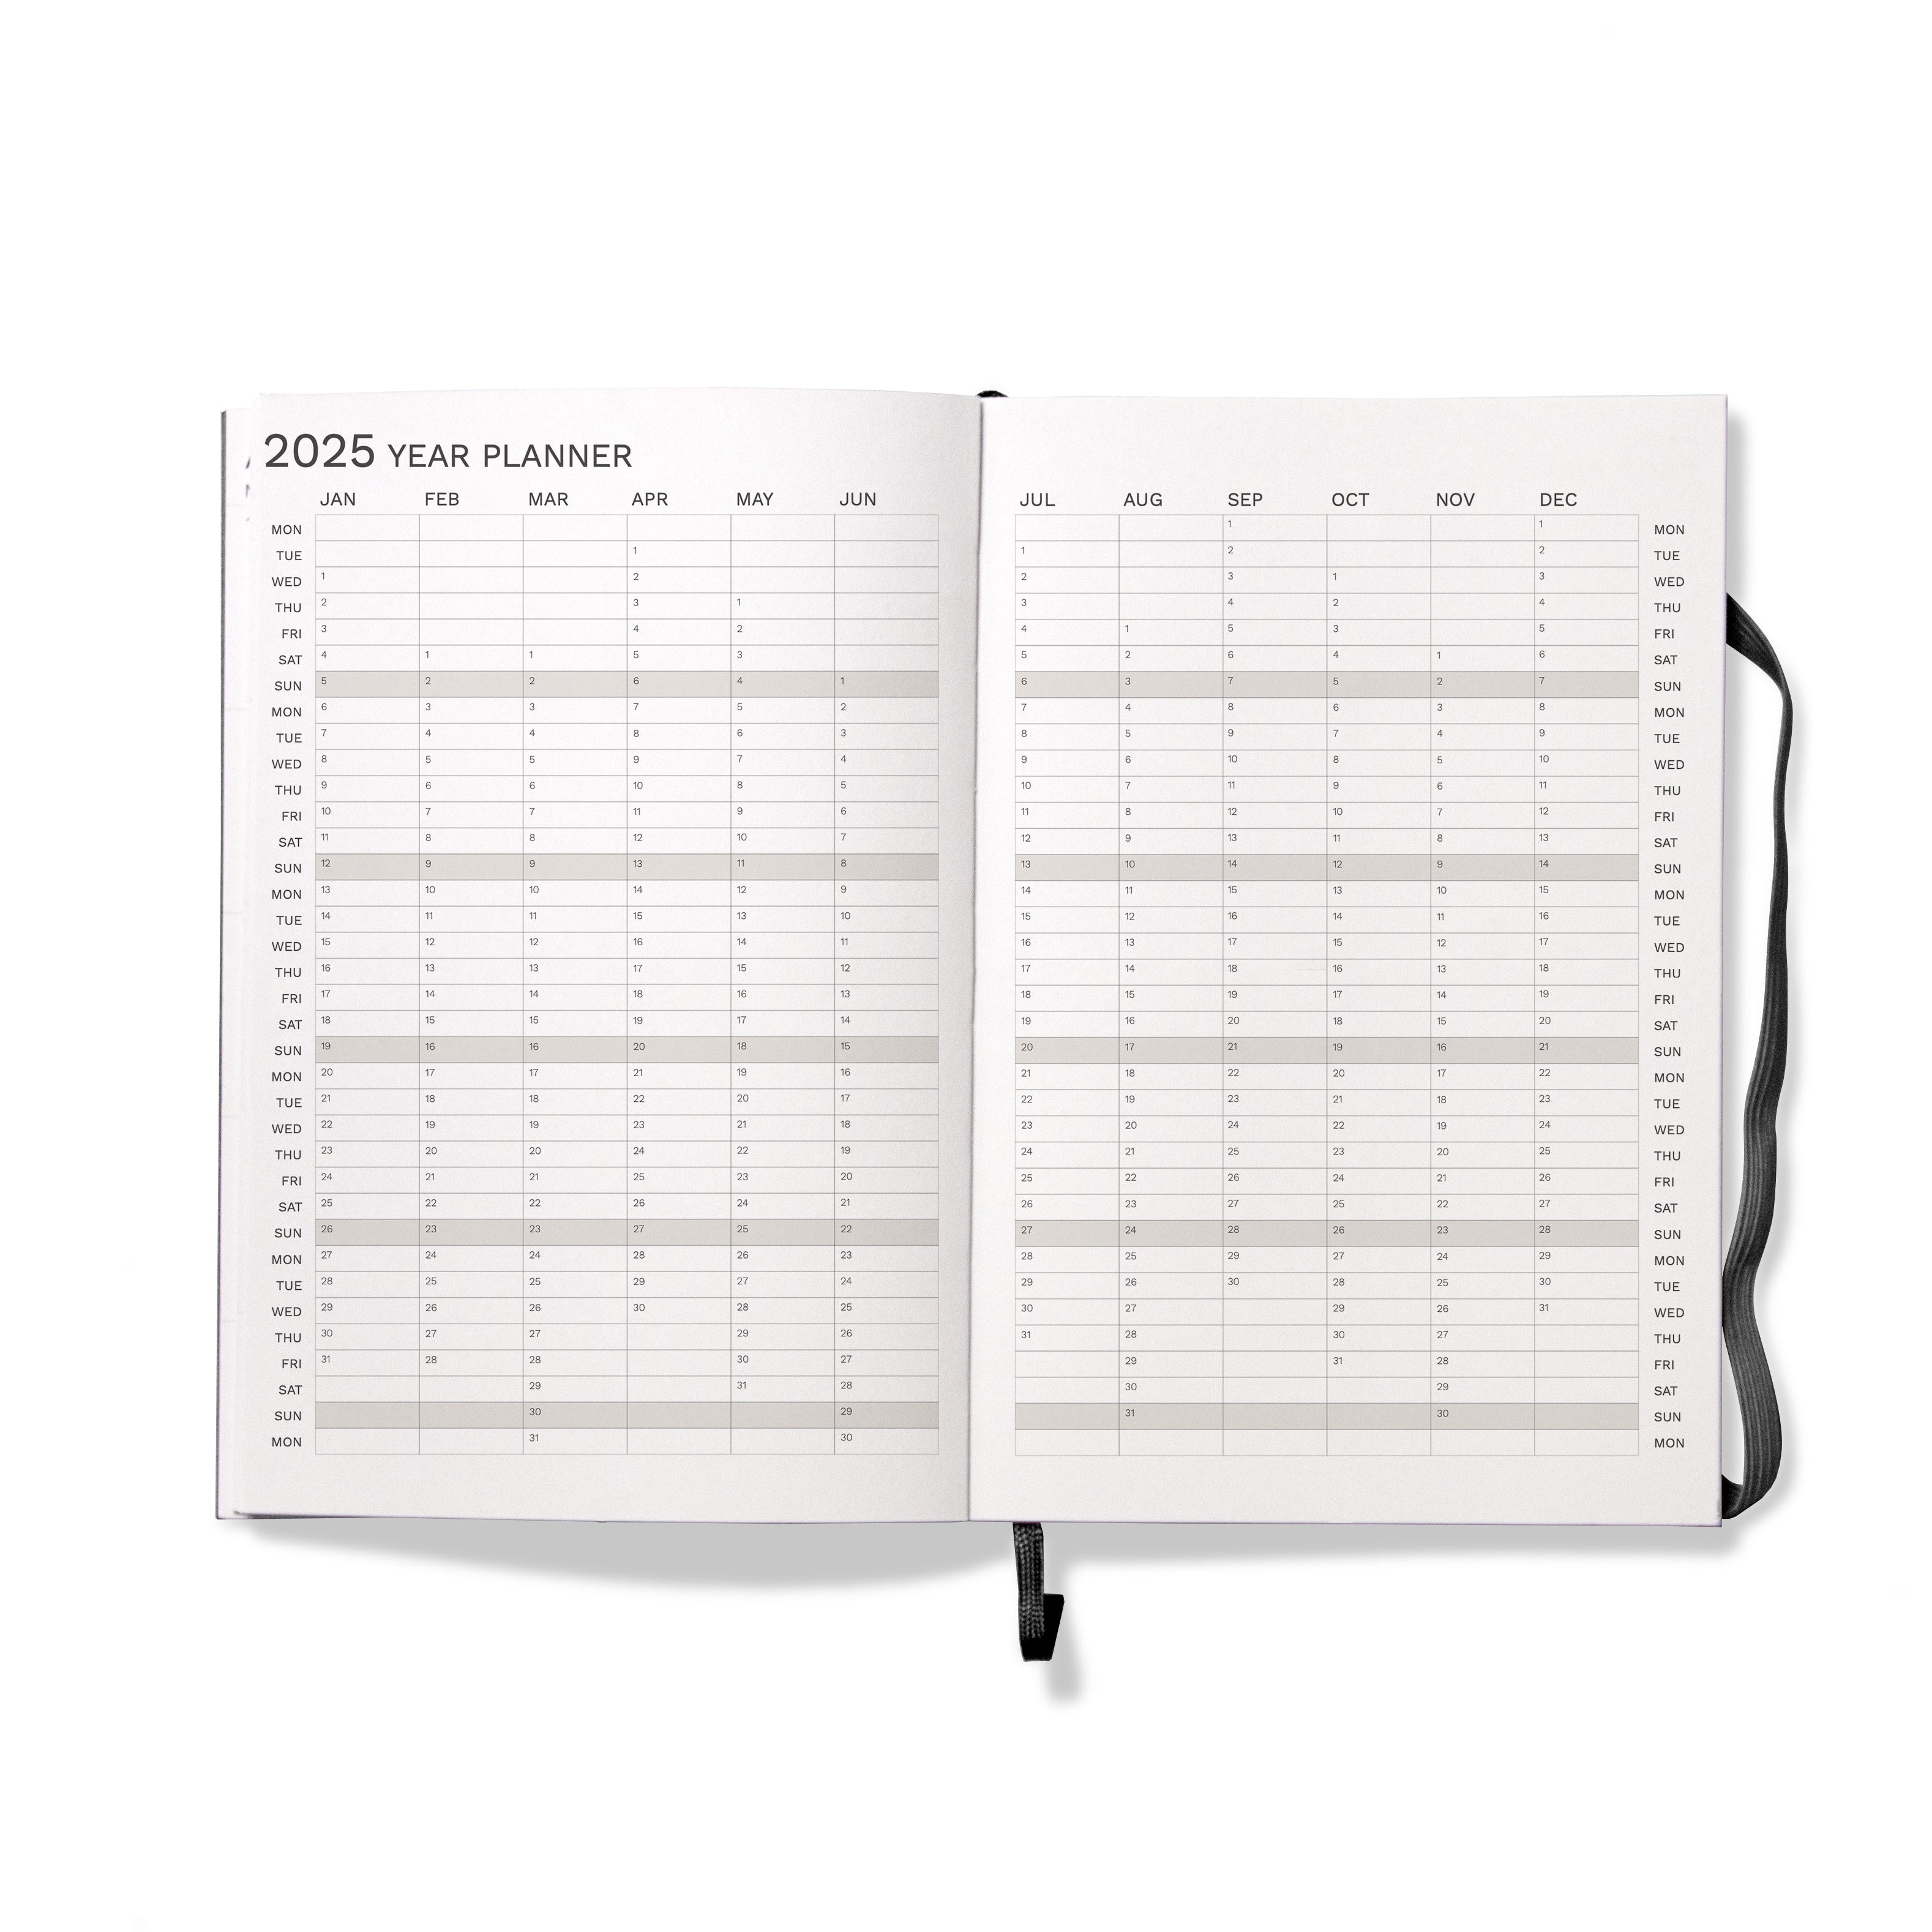 Octàgon Design 2025 Weekly Planner similar A5 size Black, year planner